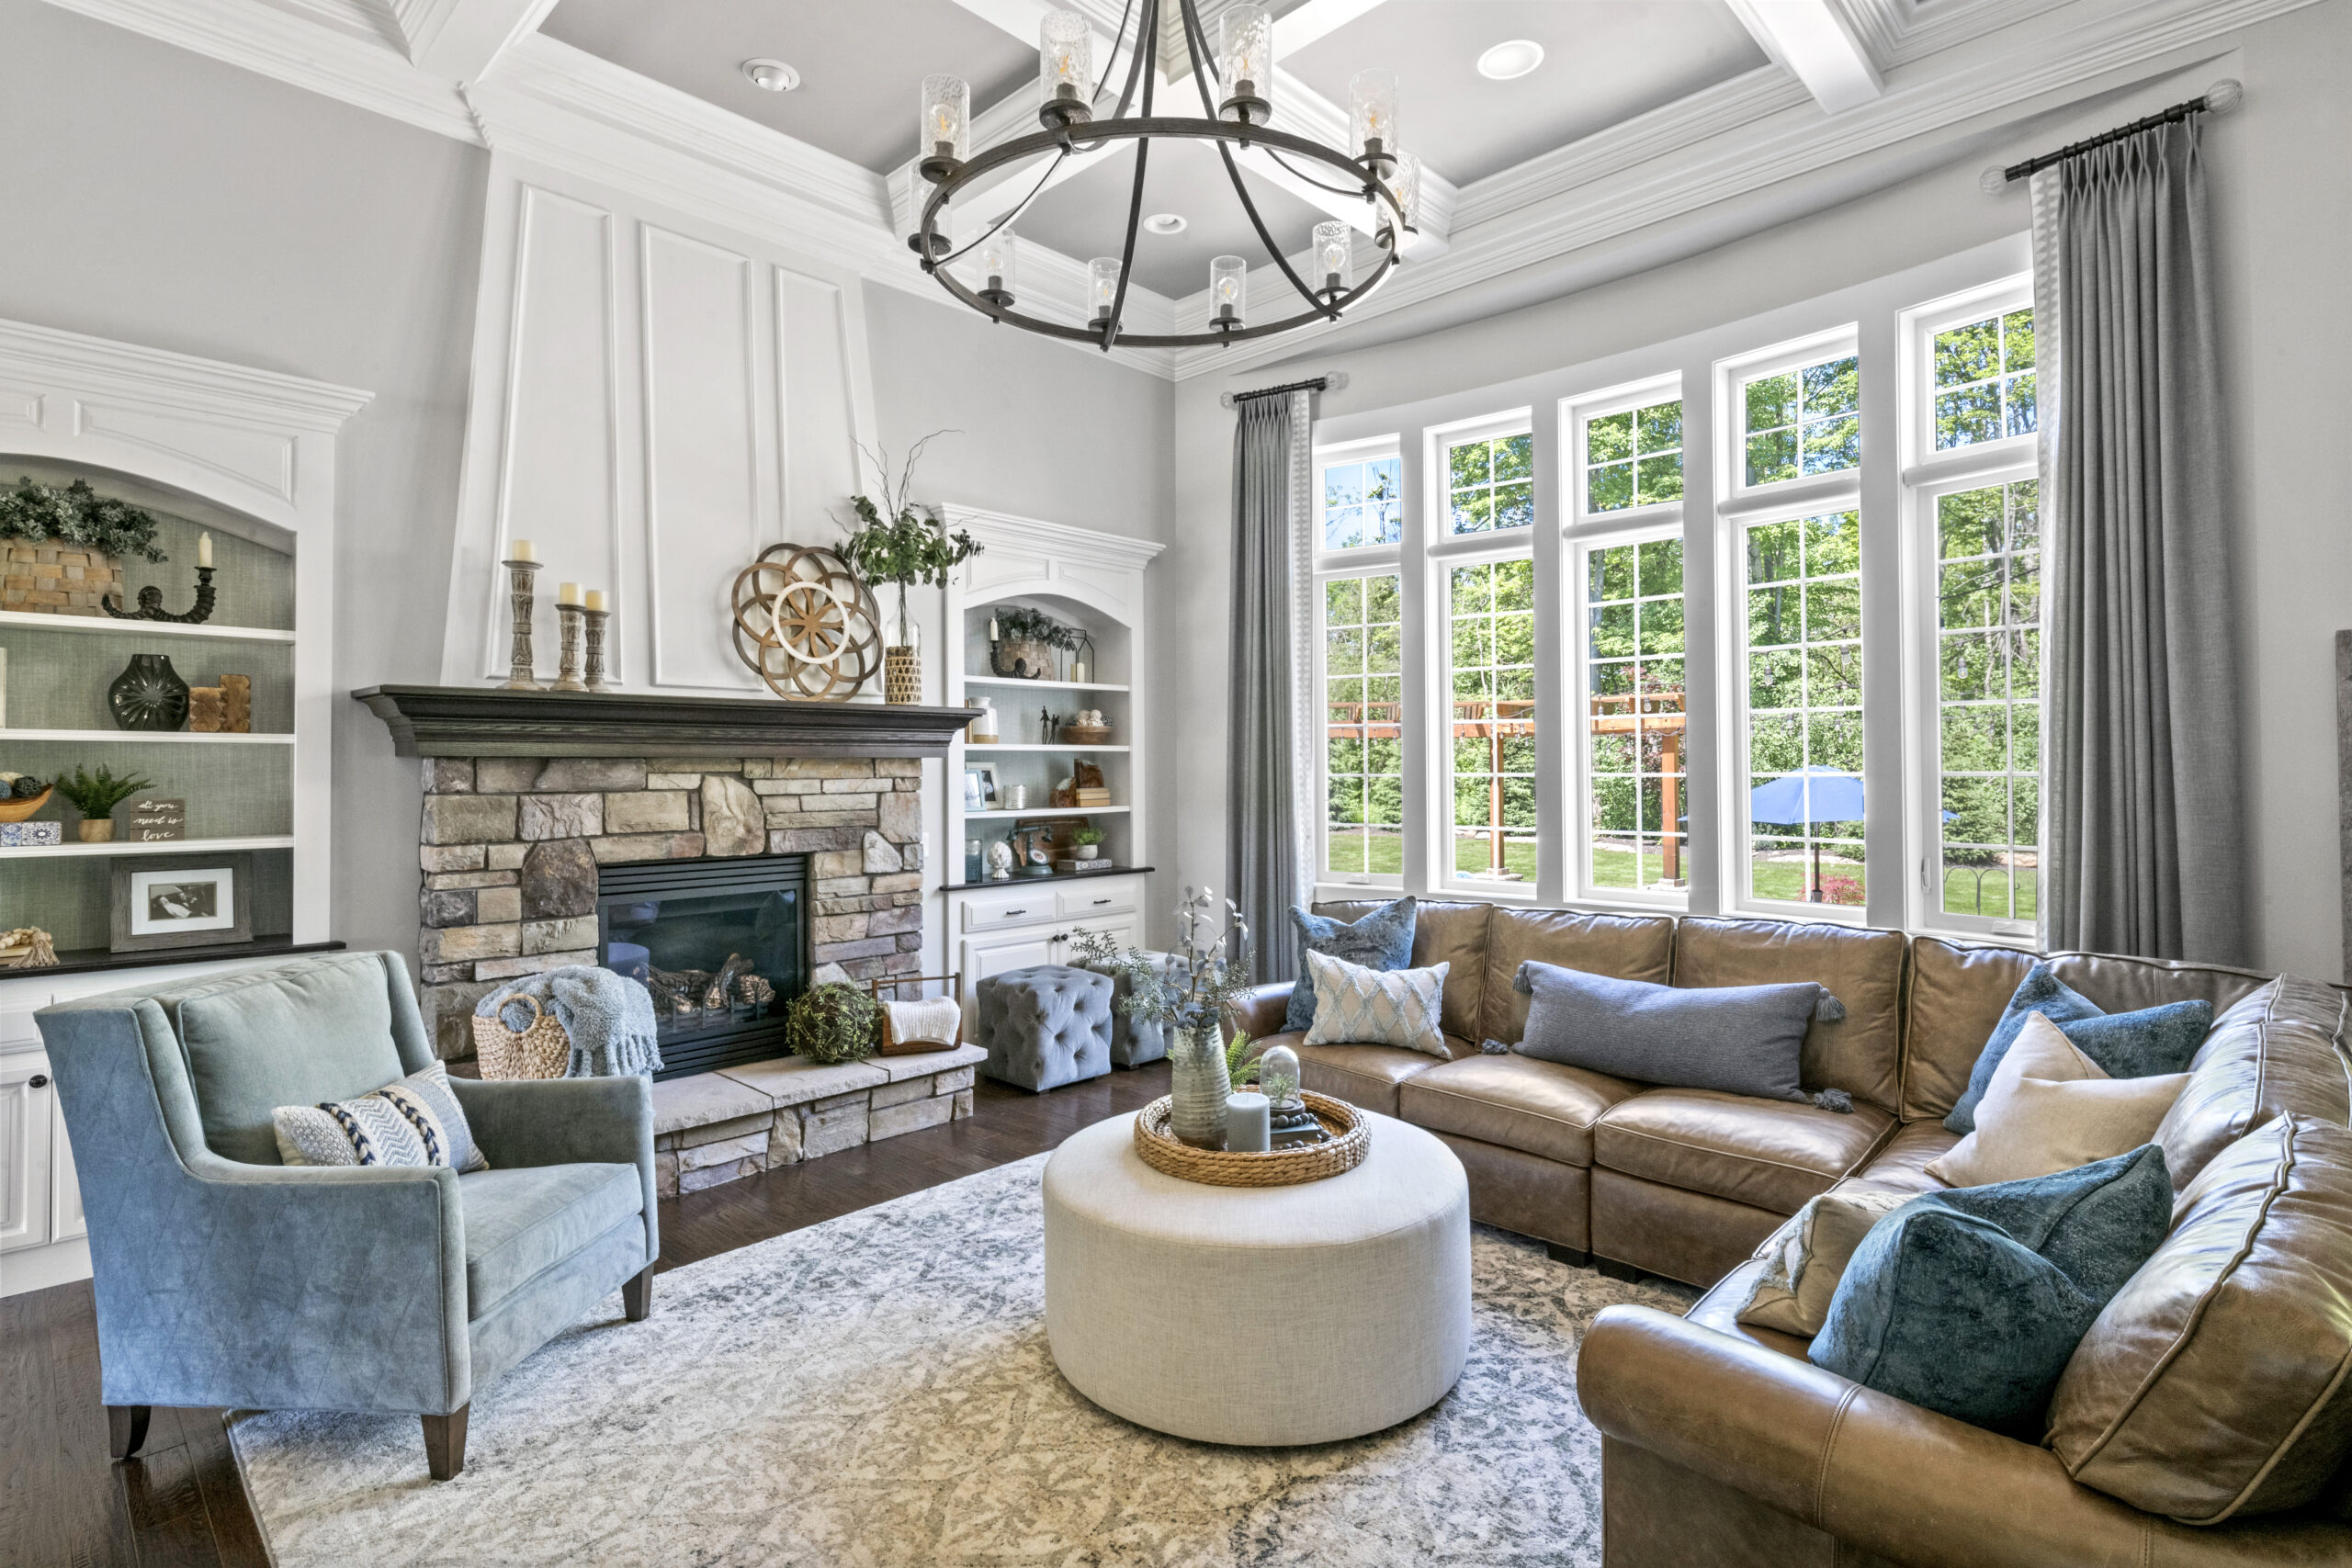 A view of the living room as you walk in from the kitchen with a large window, a stone fireplace, brown couch, circle ottoman, and blue accent pieces